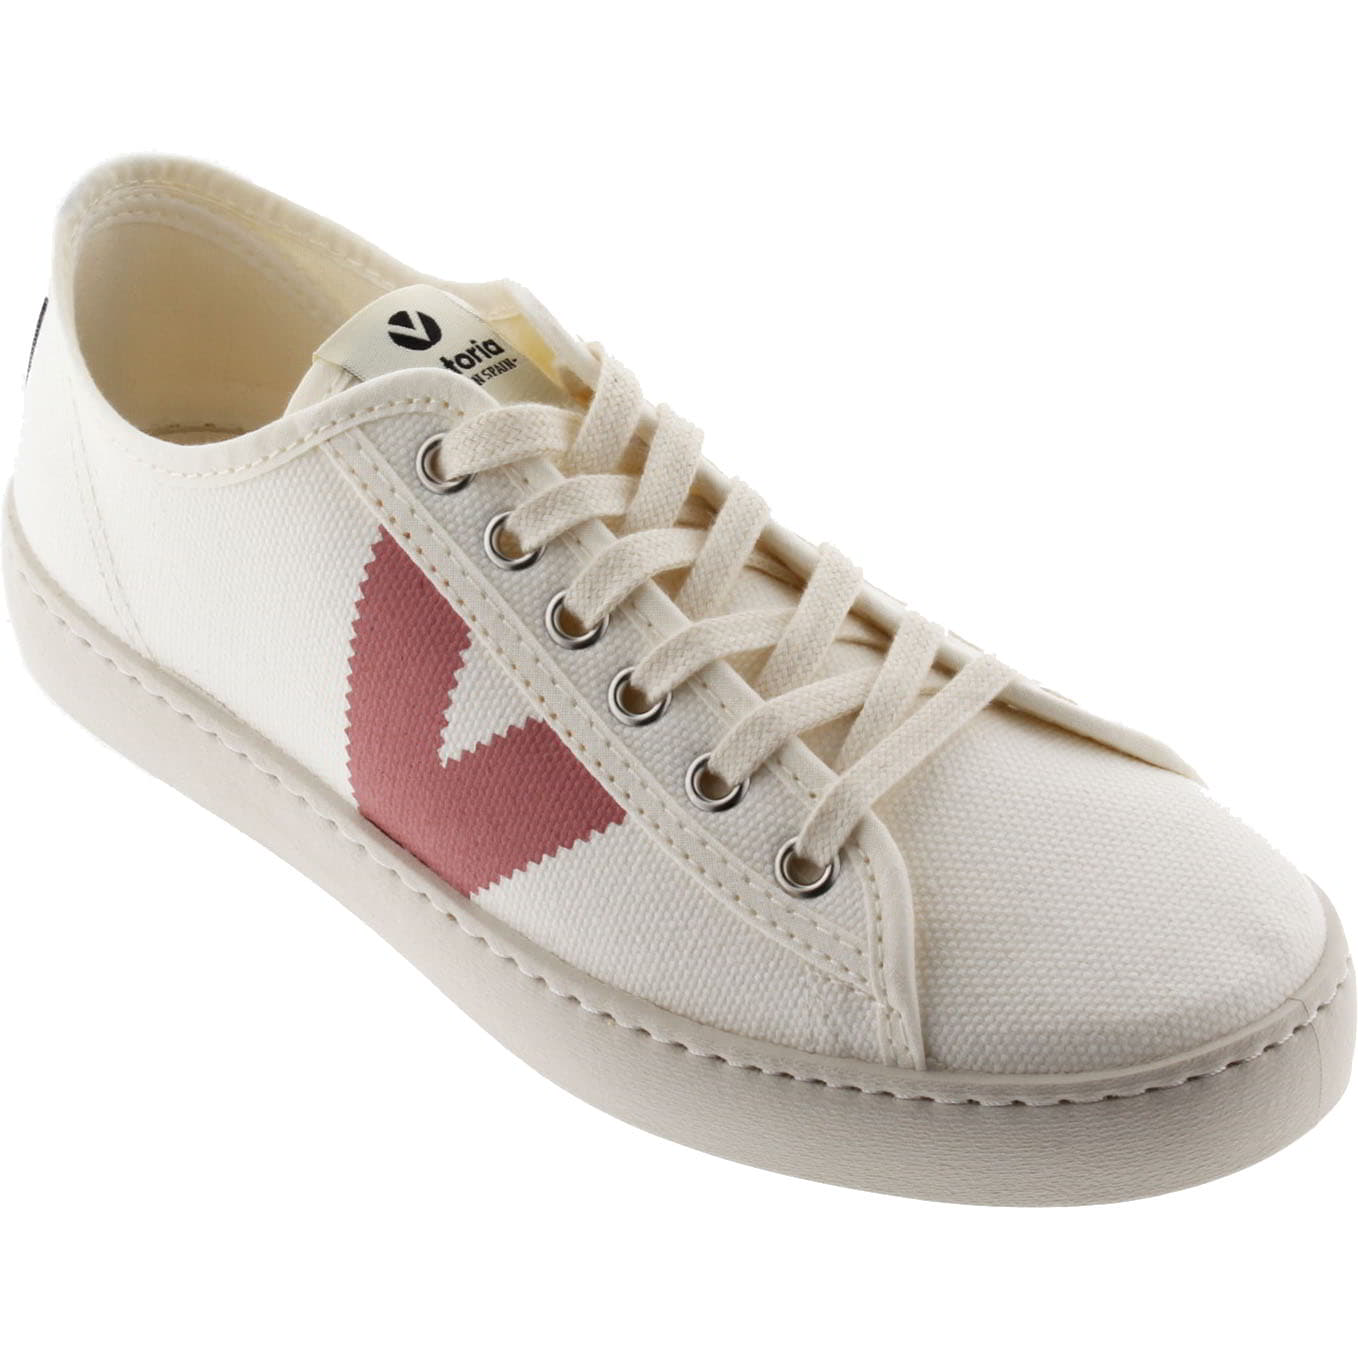 Victoria Shoes Womens Berlin Lona Canvas Lace Up Trainers - UK 6 / EU 39